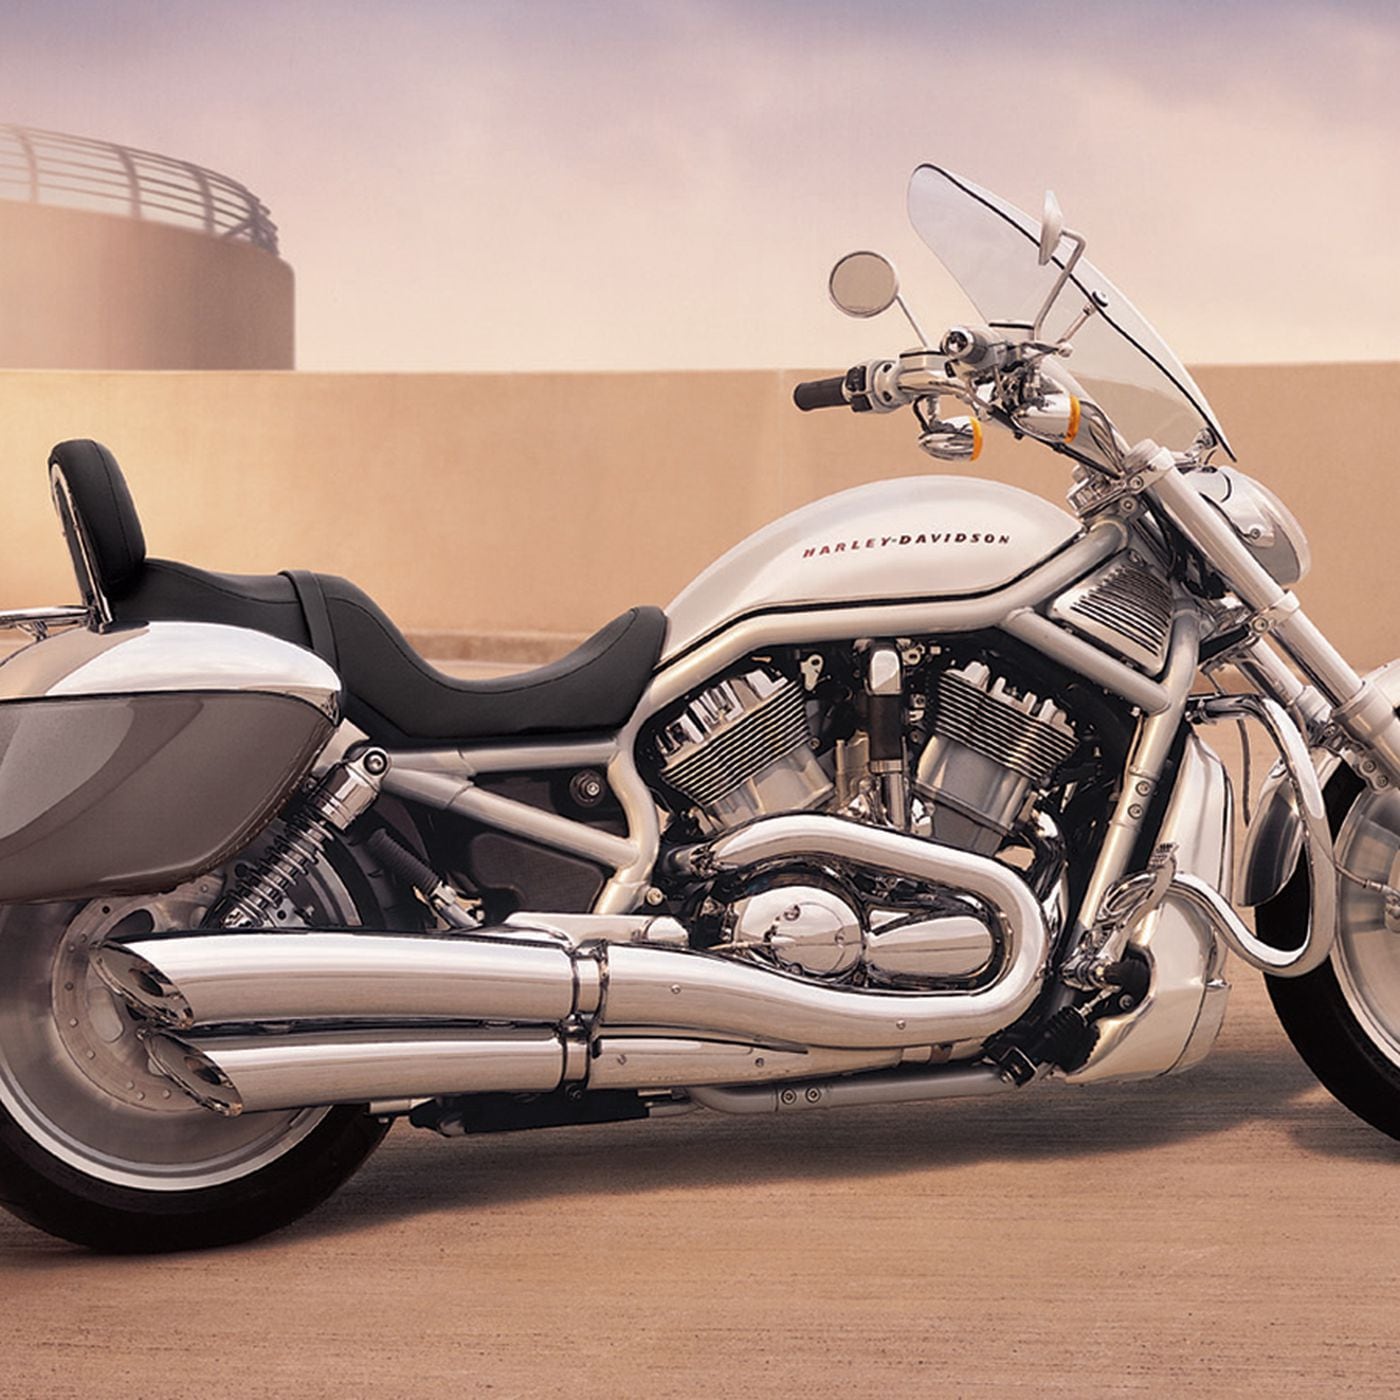 2001 Harley Davidson 1130cc Vrsca V Rod Review From The Archives Motorcycle Cruiser